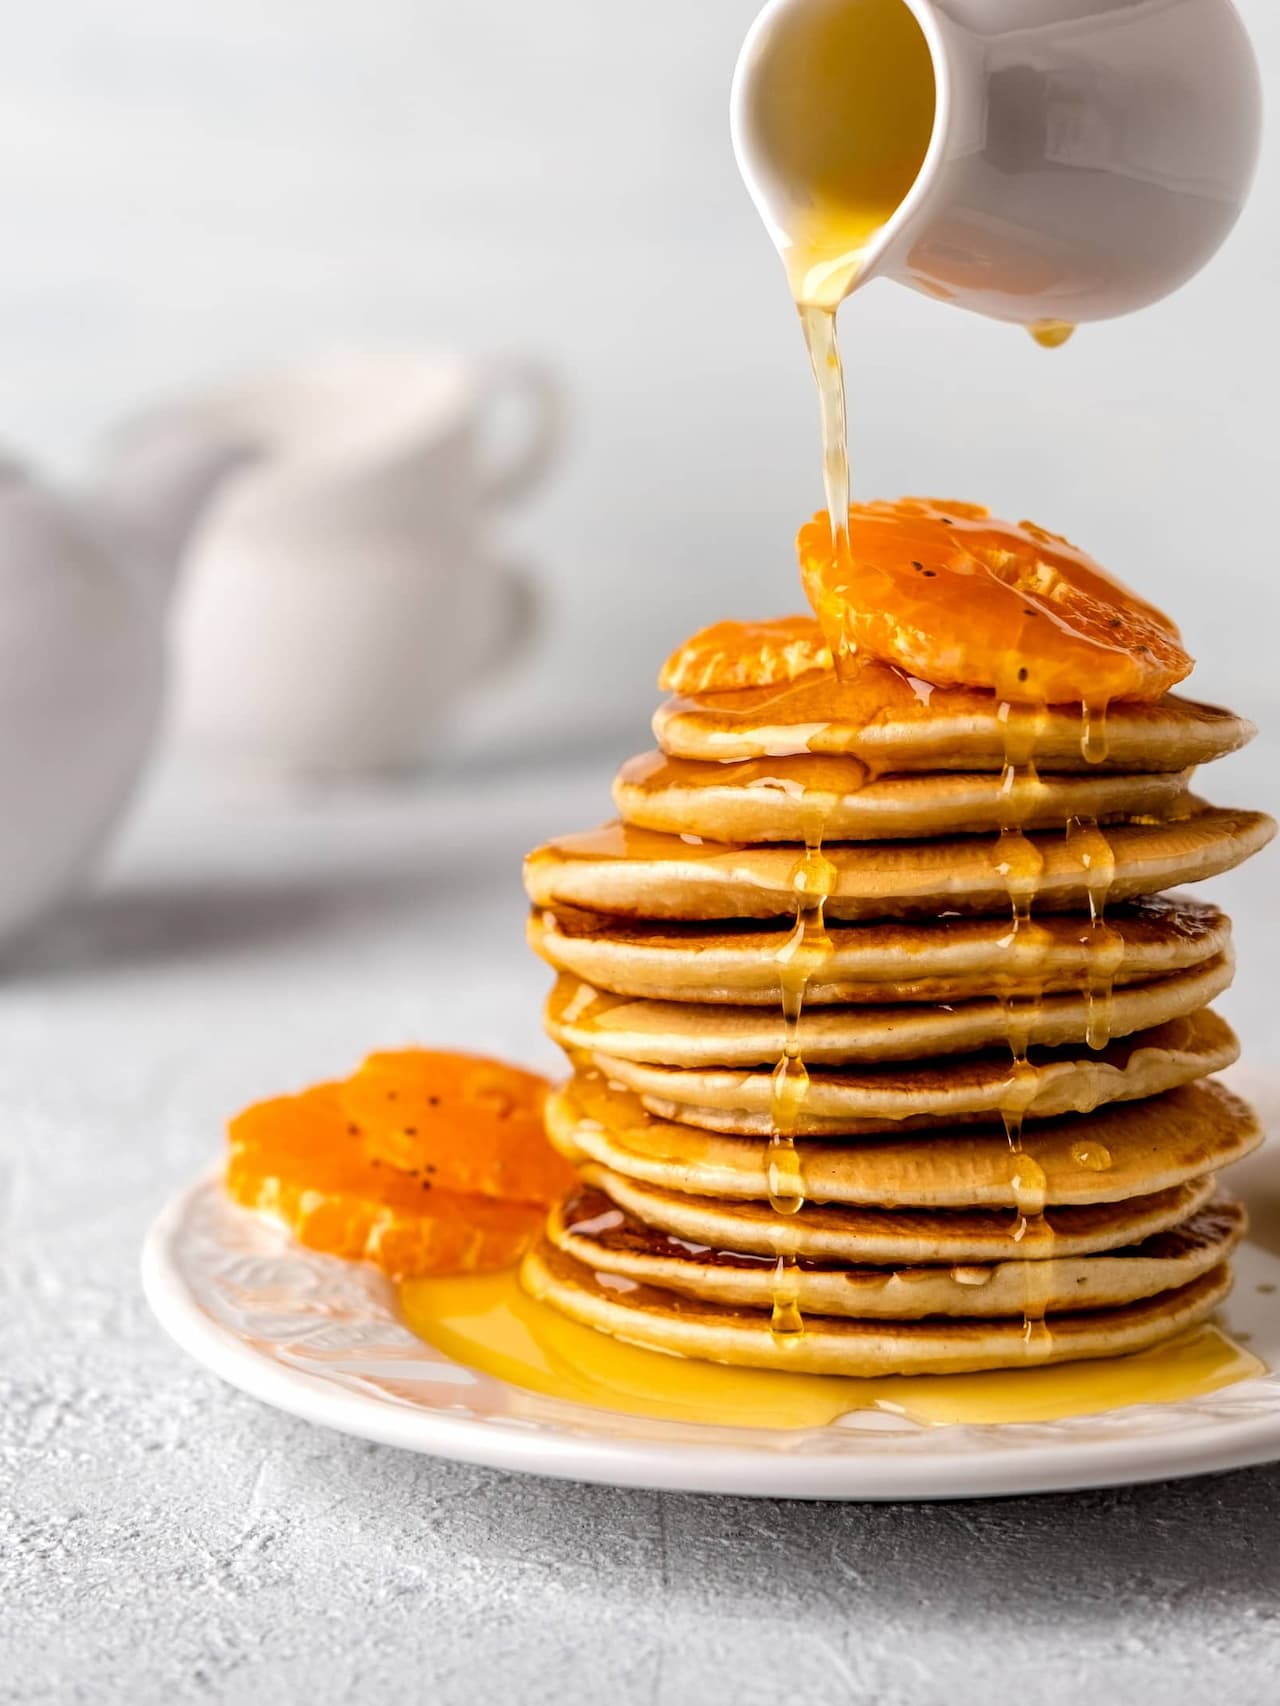 4 Maple Syrup Alternatives for Your Pancakes